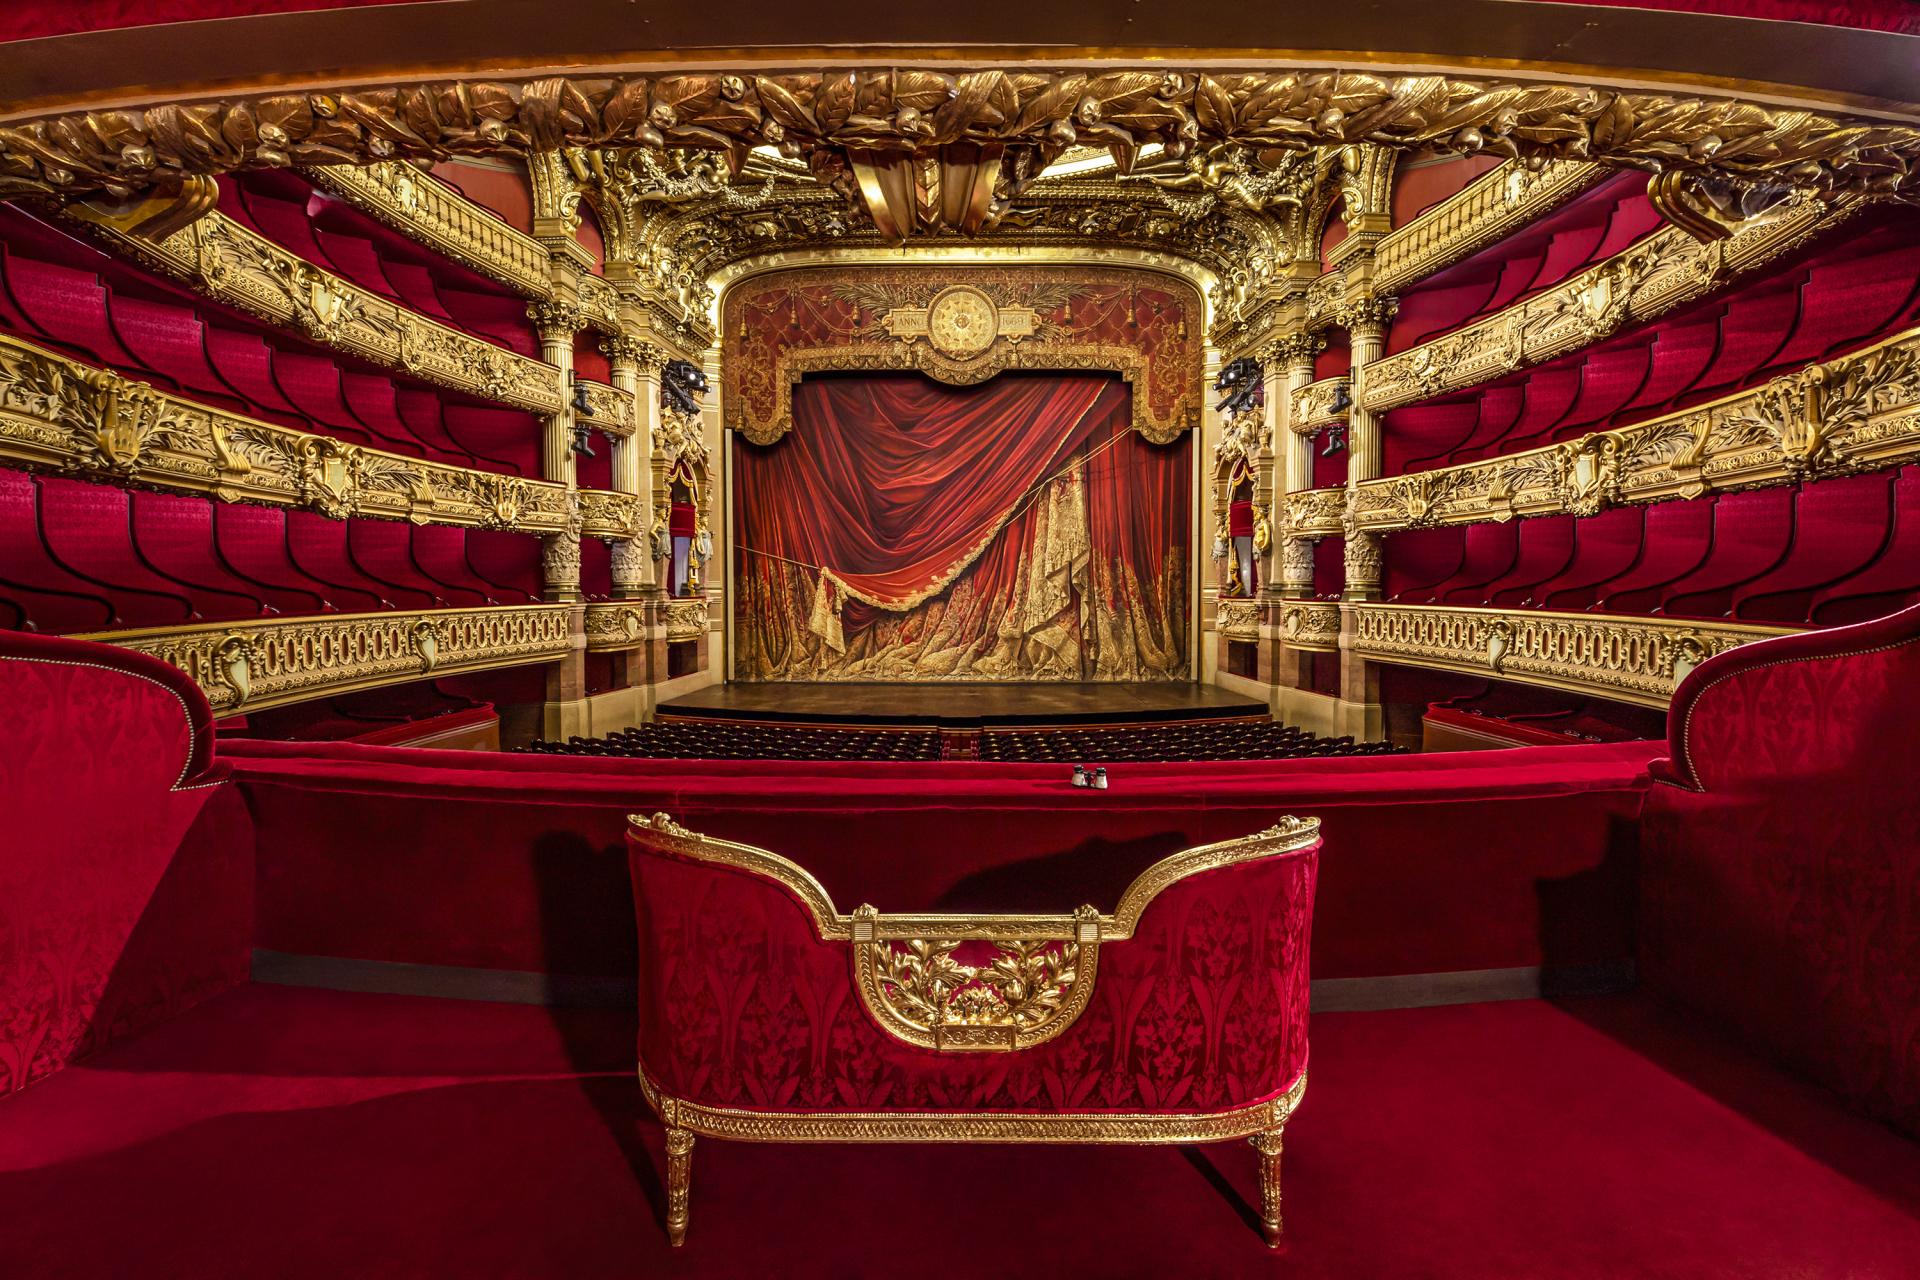 AirBnB is now offering a 'Phantom of the Opera'-themed stay at the Palais Garnier in Paris